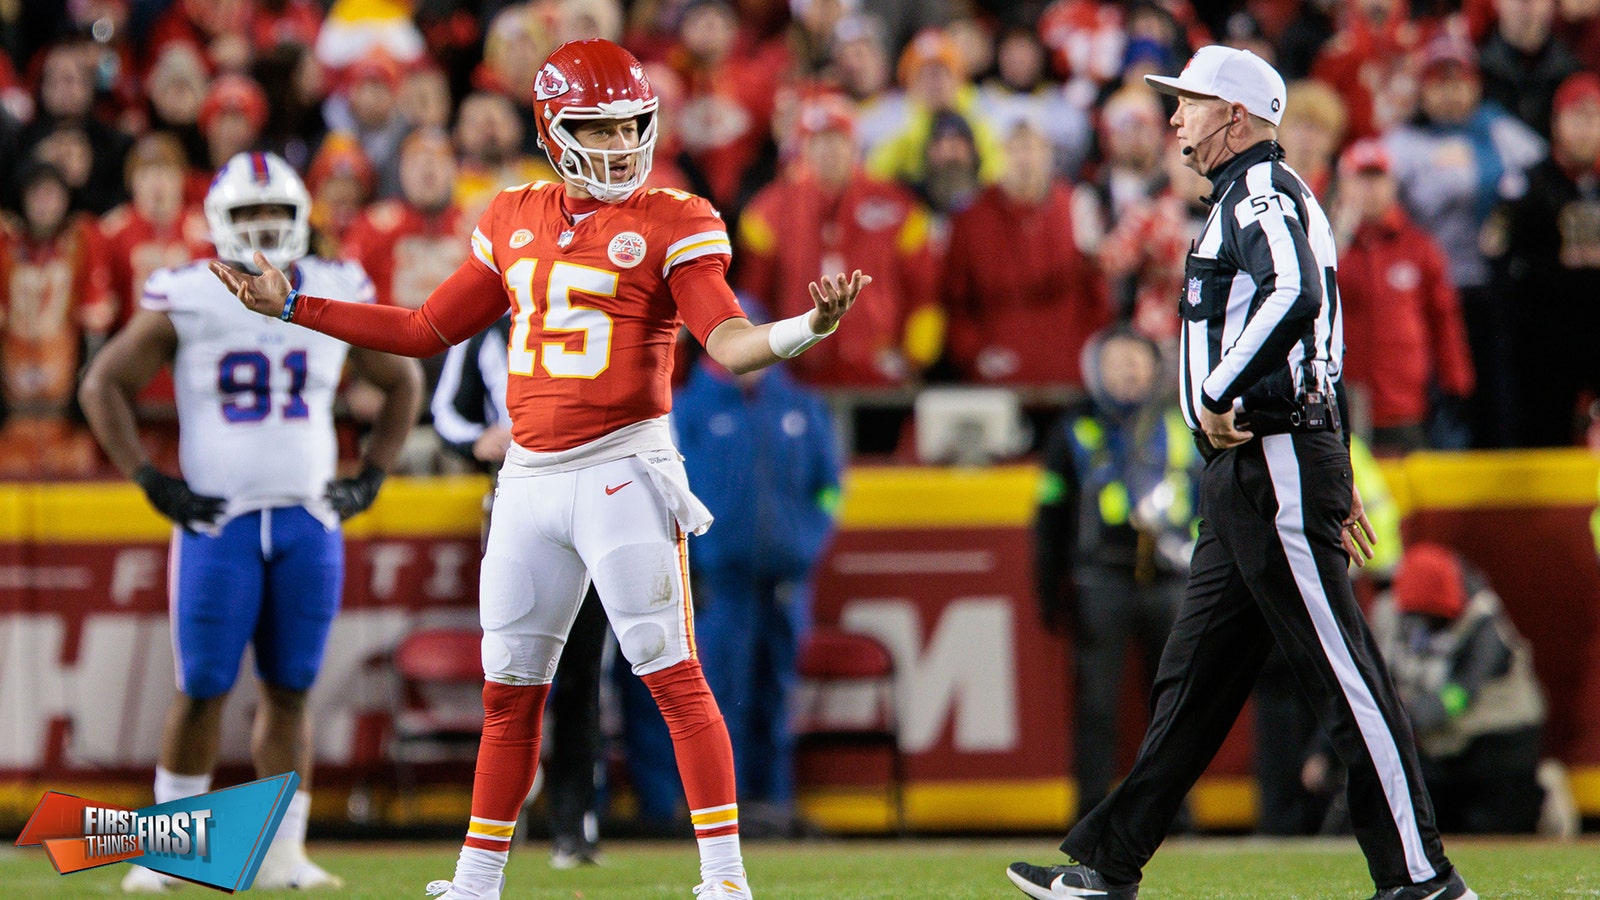 Chiefs underdogs @ Bills in AFC Divisional: Mahomes vs. Allen, who wins?